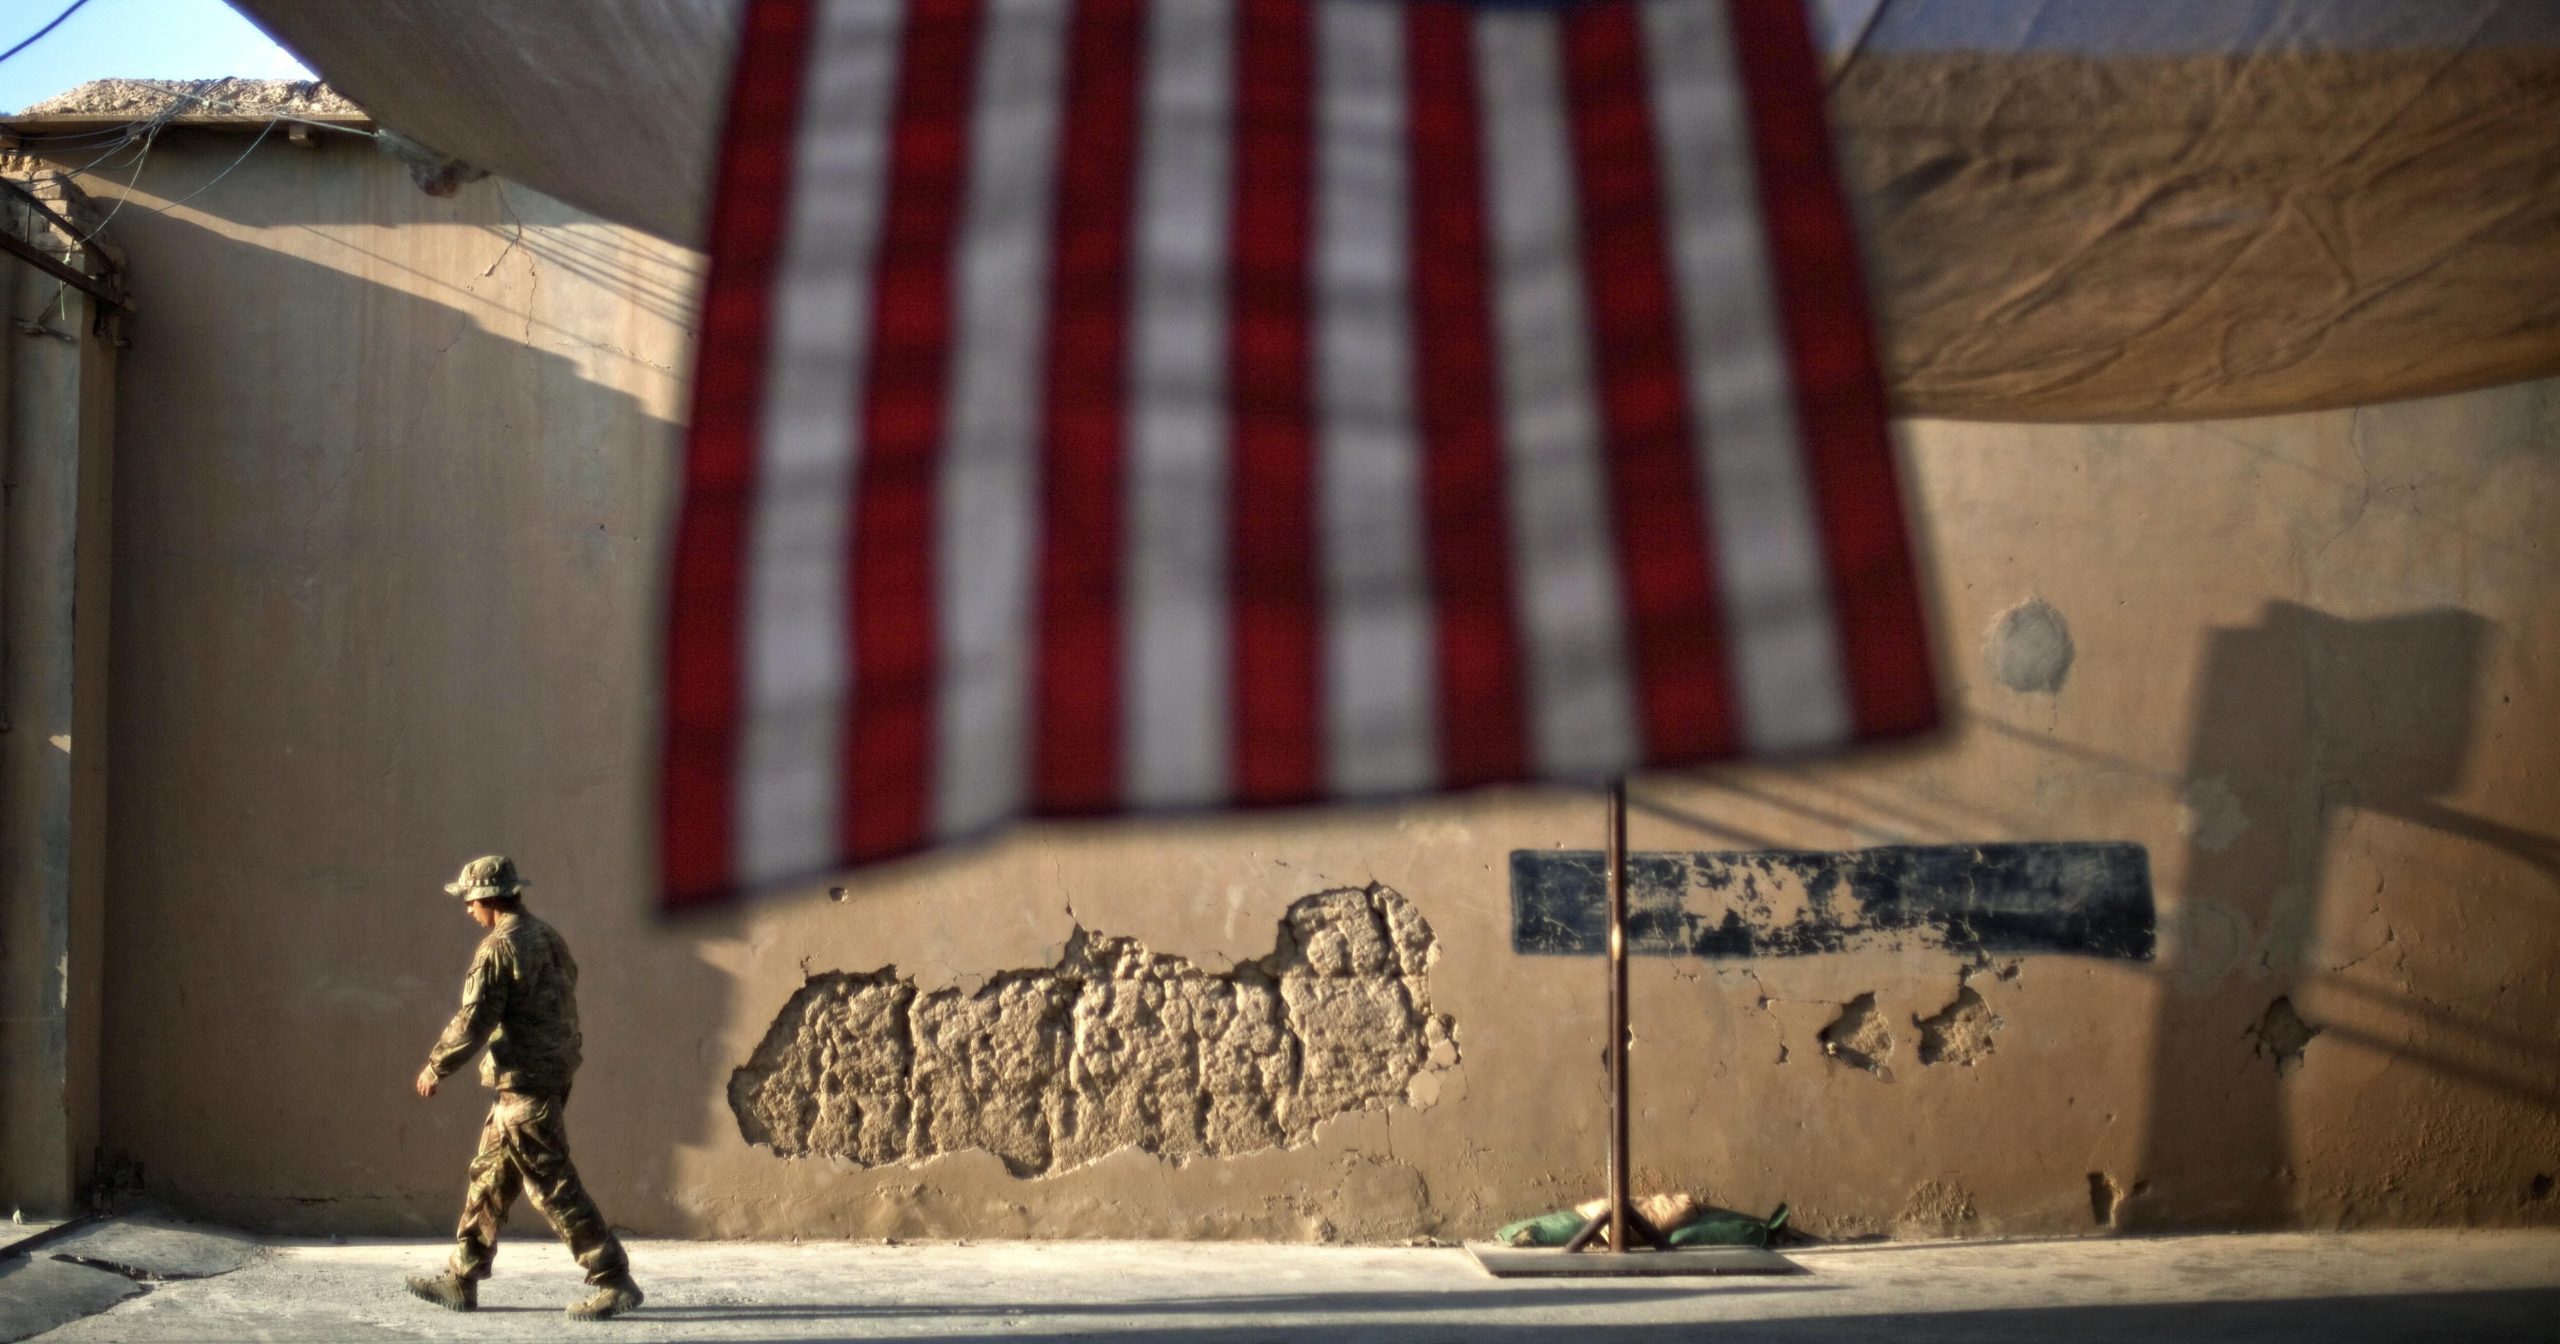 A U.S. Army soldier walks past an American flag at Forward Operating Base Bostick in Kunar province, Afghanistan, on Sept. 11, 2011.